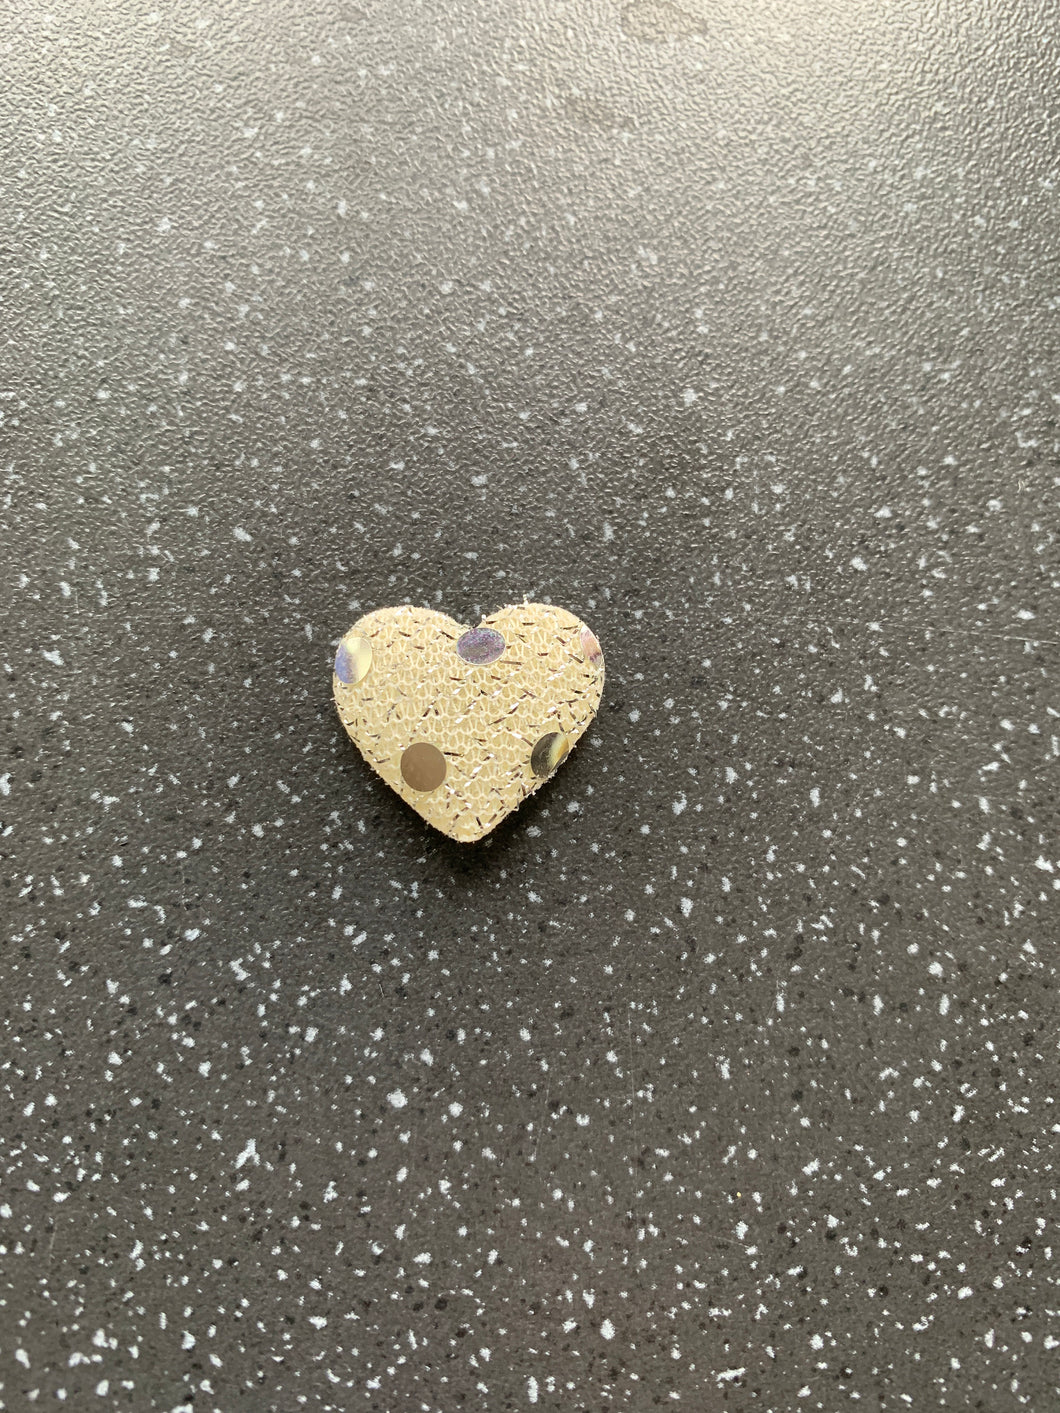 Manifest Love Soft Sequin Heart Silver Charm Sponge For Wallet or Under Pillow for Successful Relationship Marriage Engagement 1.5 x 1.8cm